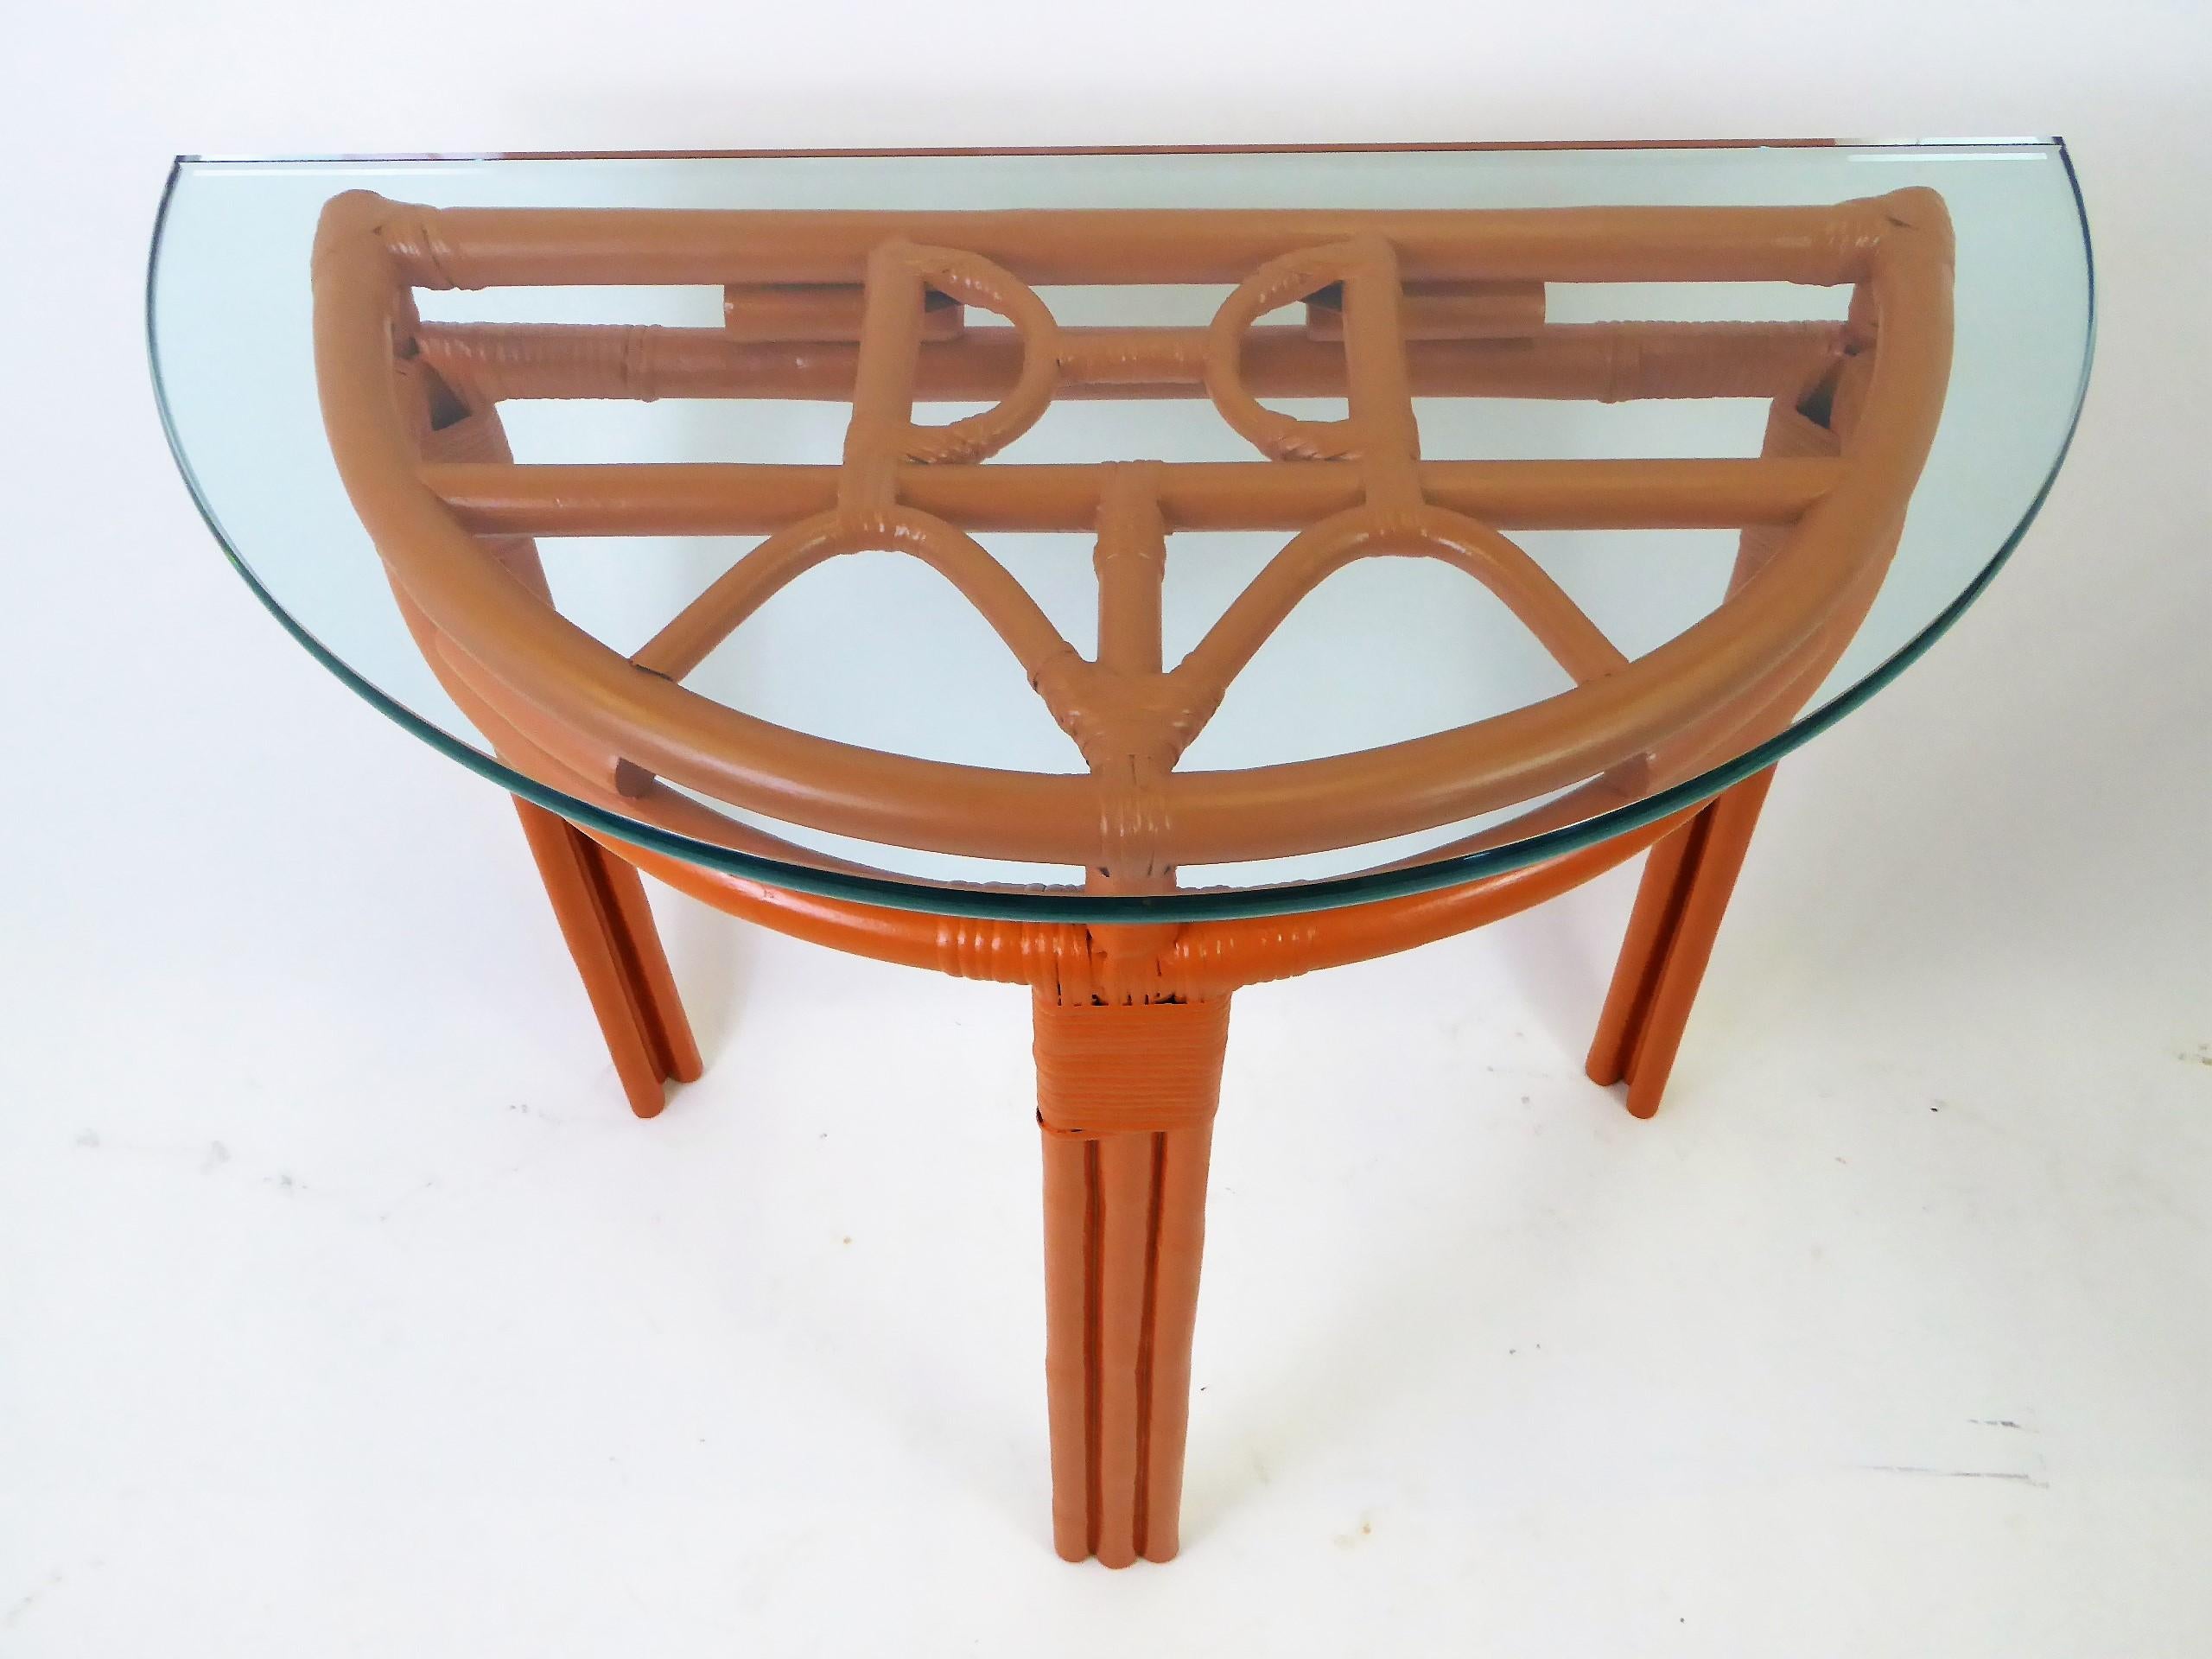 1940s Painted Rattan Demilune Glass Top Consoles in Hermes Orange 3